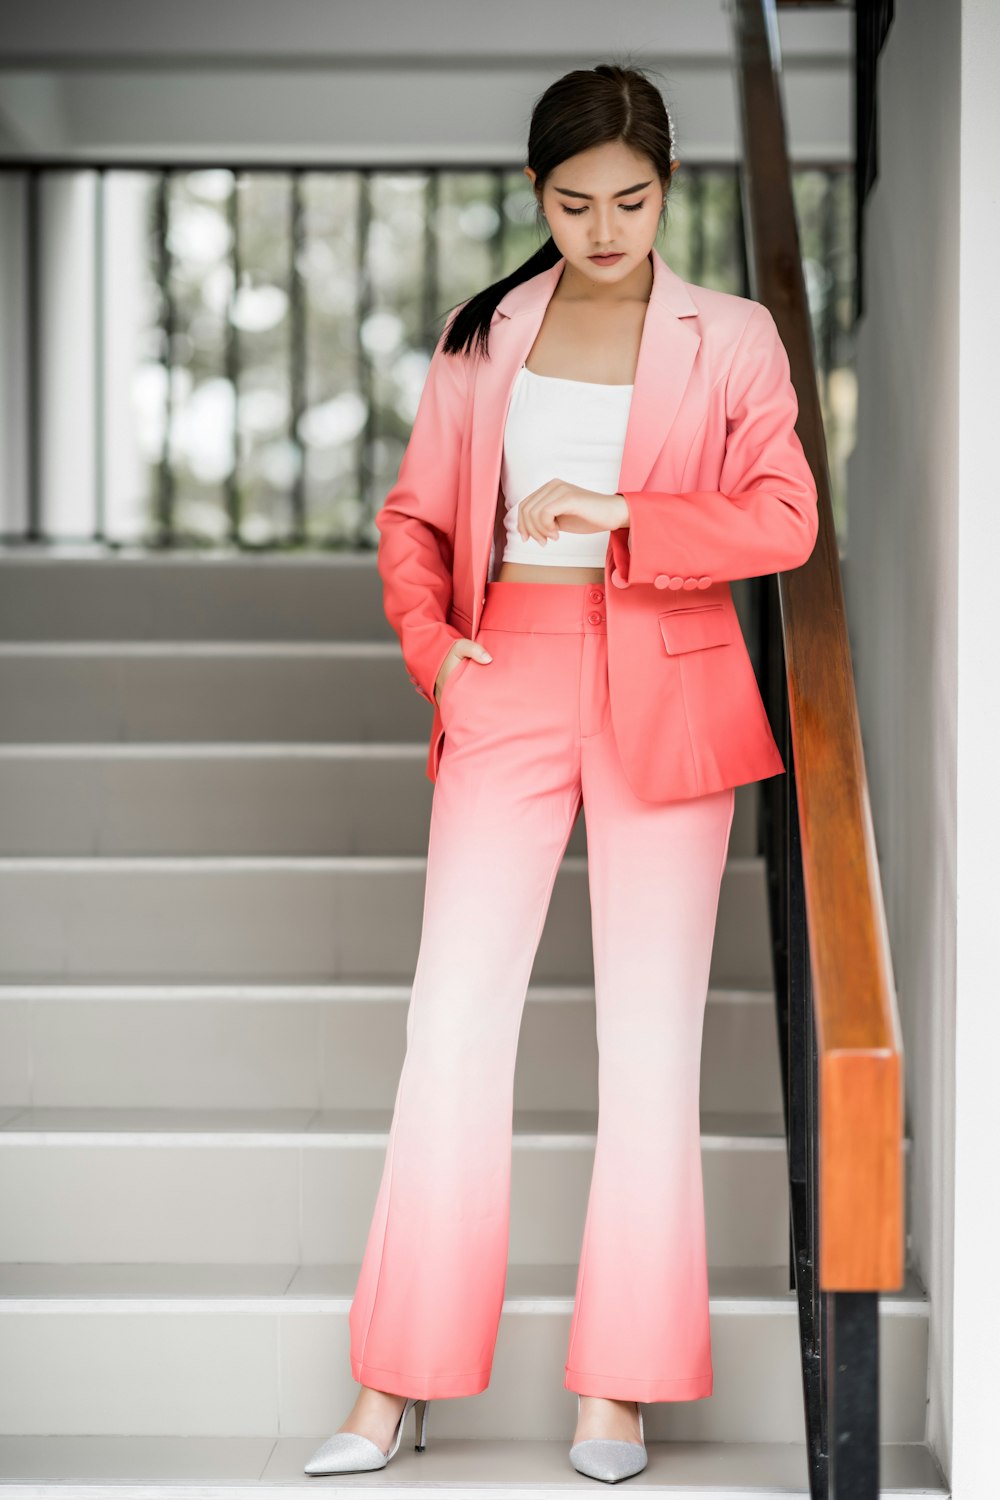 woman wearing pink and white ombre blazer and pants staring on her watch